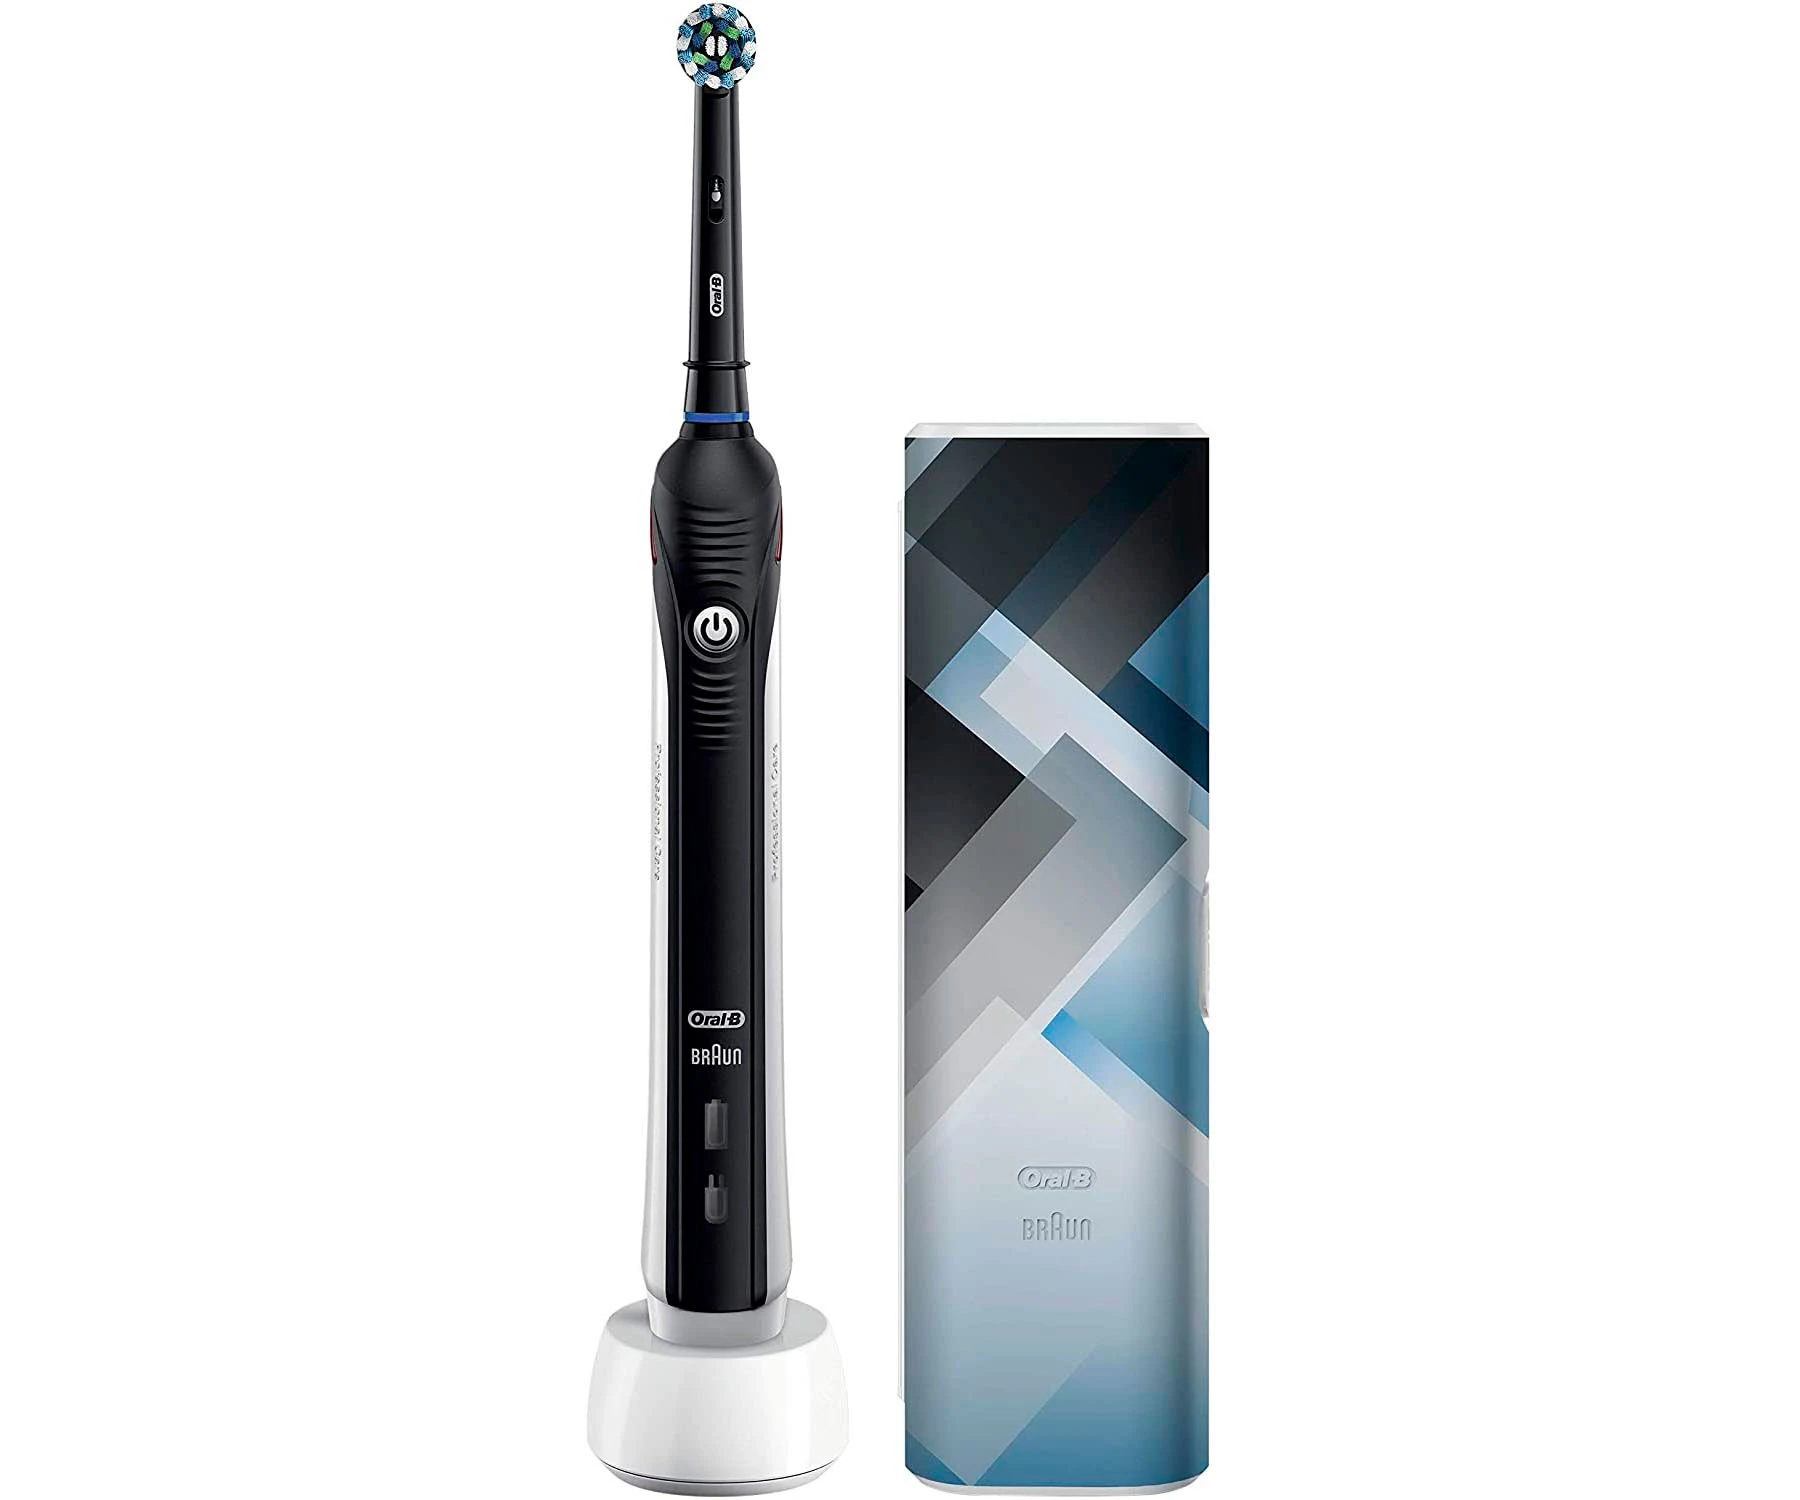 BRAUN ORAL B PRO ART black rechargeable electric toothbrush 3D technology|Electric Toothbrushes| - AliExpress